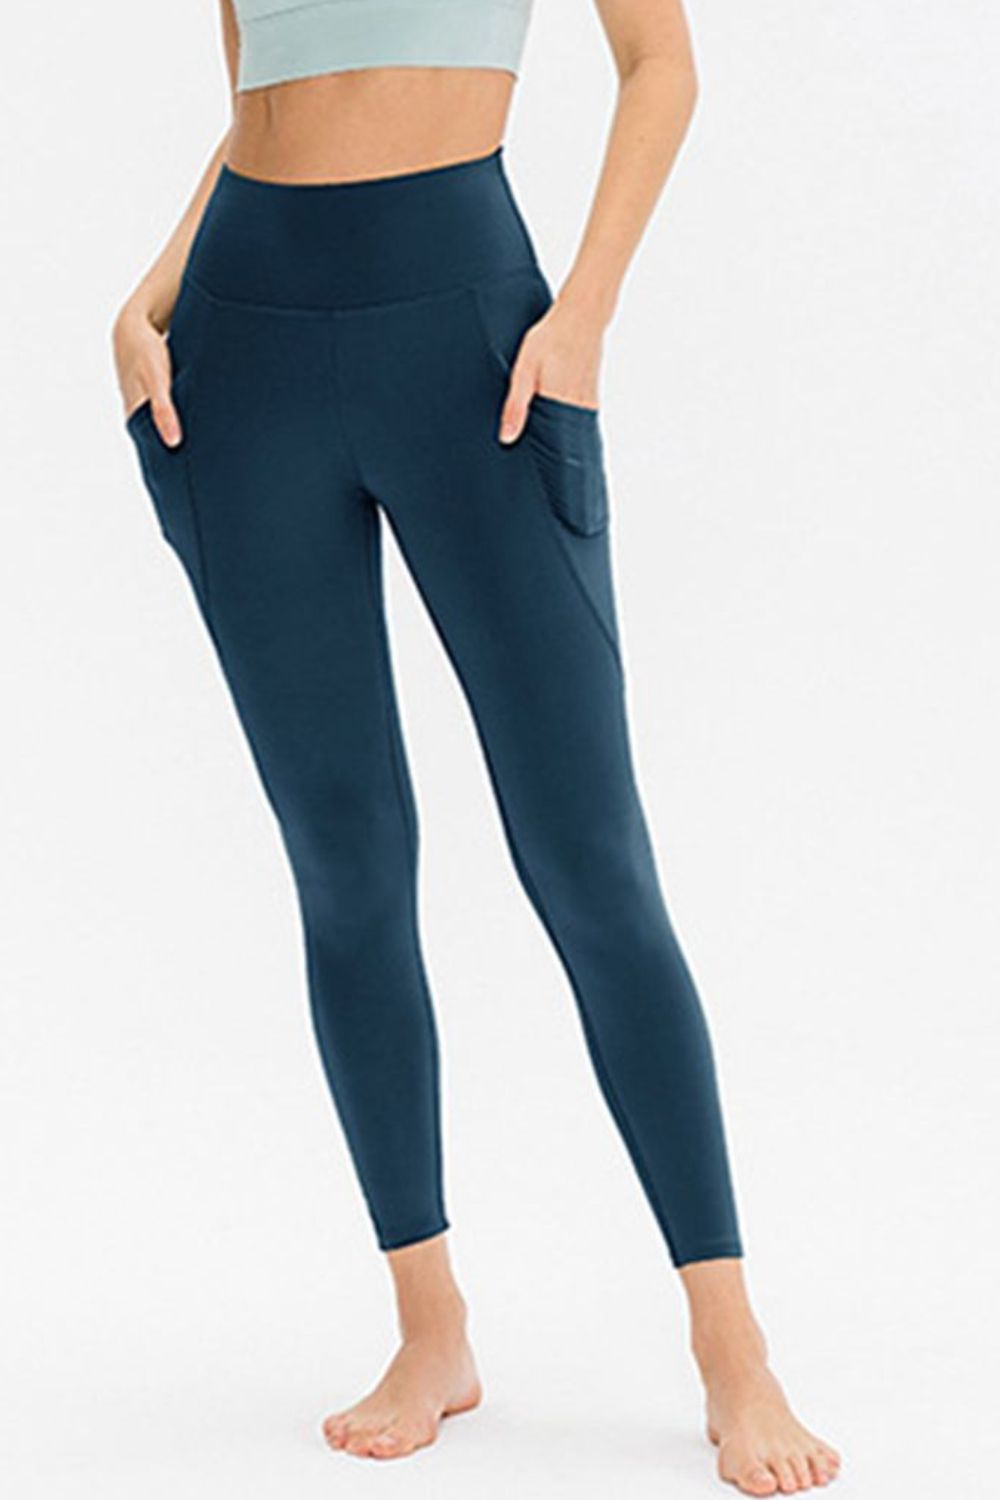 Slim Fit Long Active Leggings with Pockets - Teal / S - Women’s Clothing & Accessories - Activewear - 6 - 2024